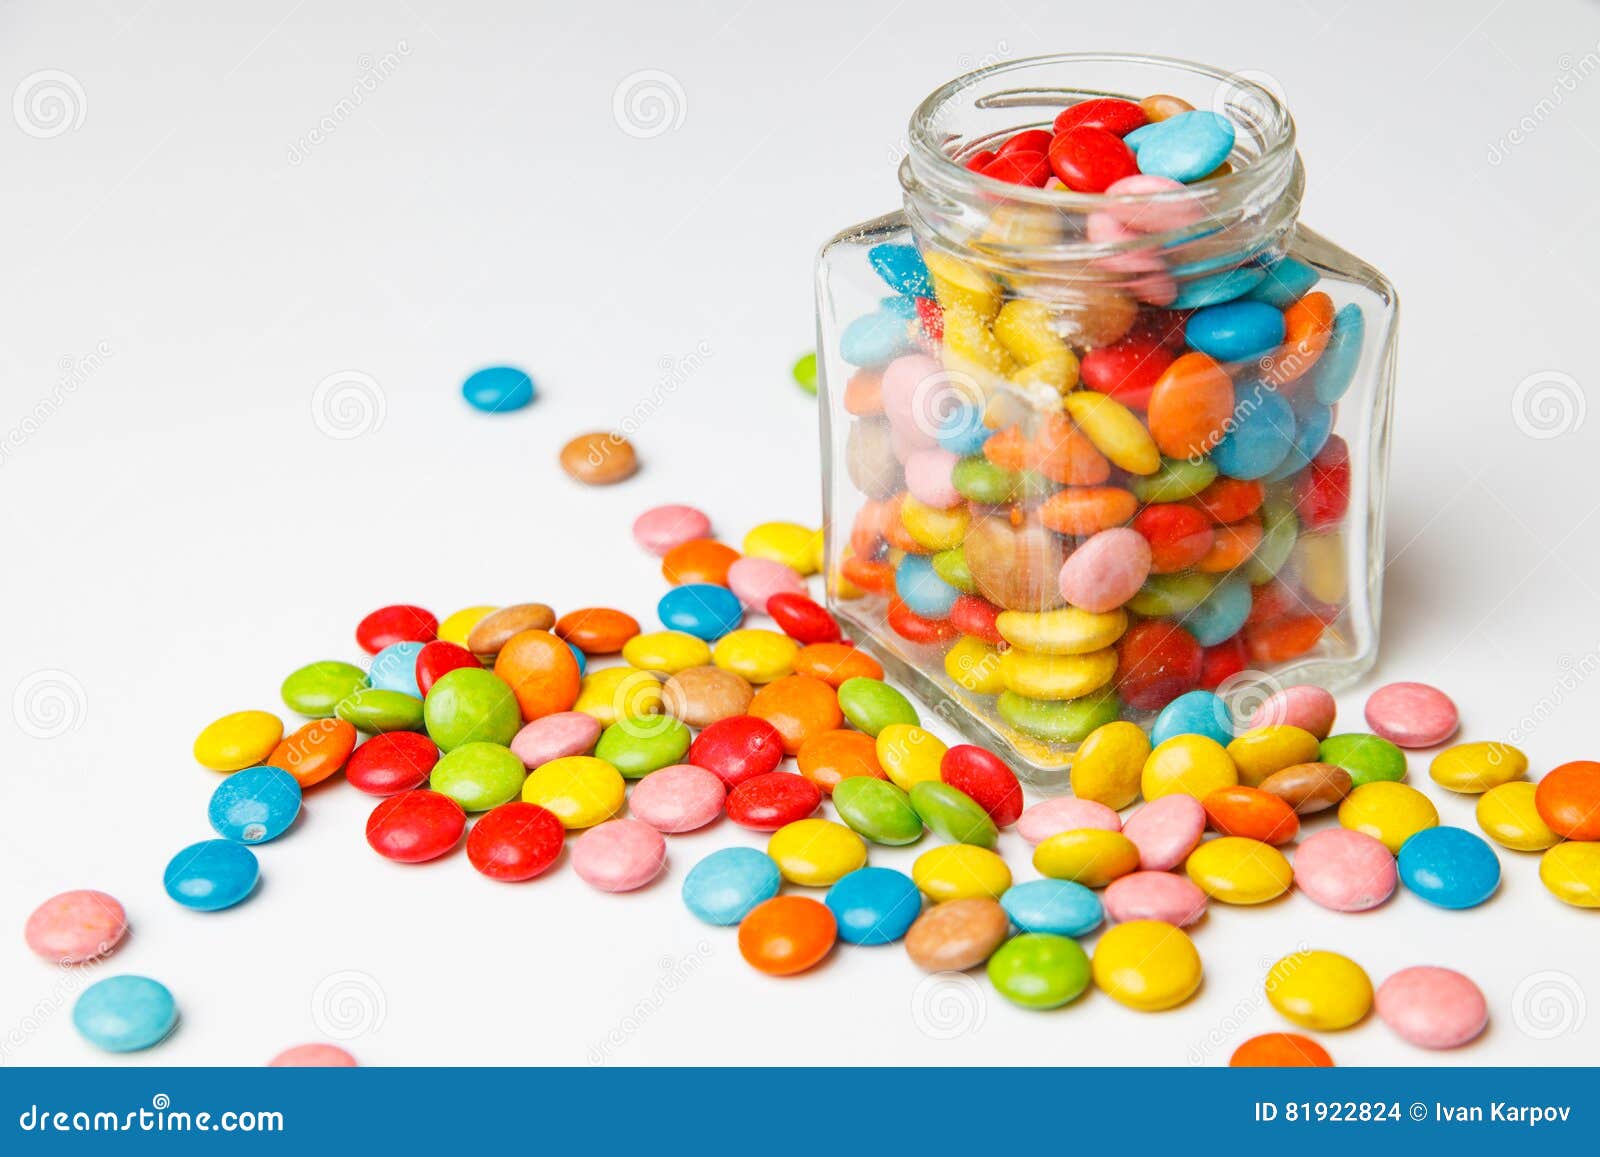 Glass Jar with Colorful Candy Scattered on the Boards. Festive ...